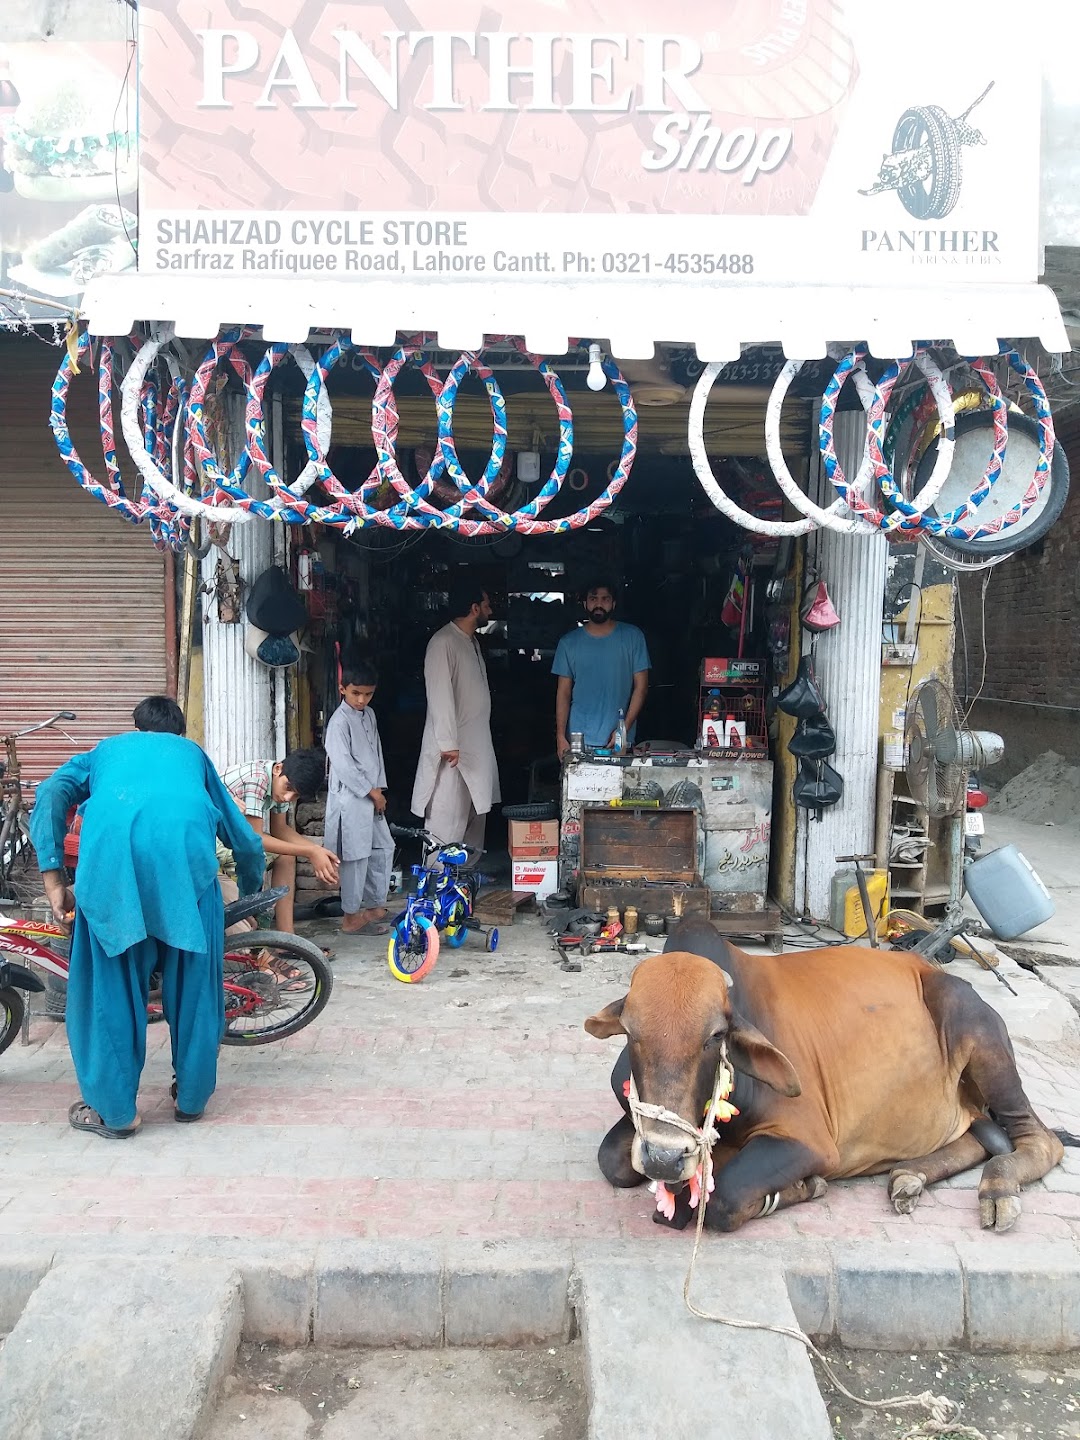 Shahzad cycle store